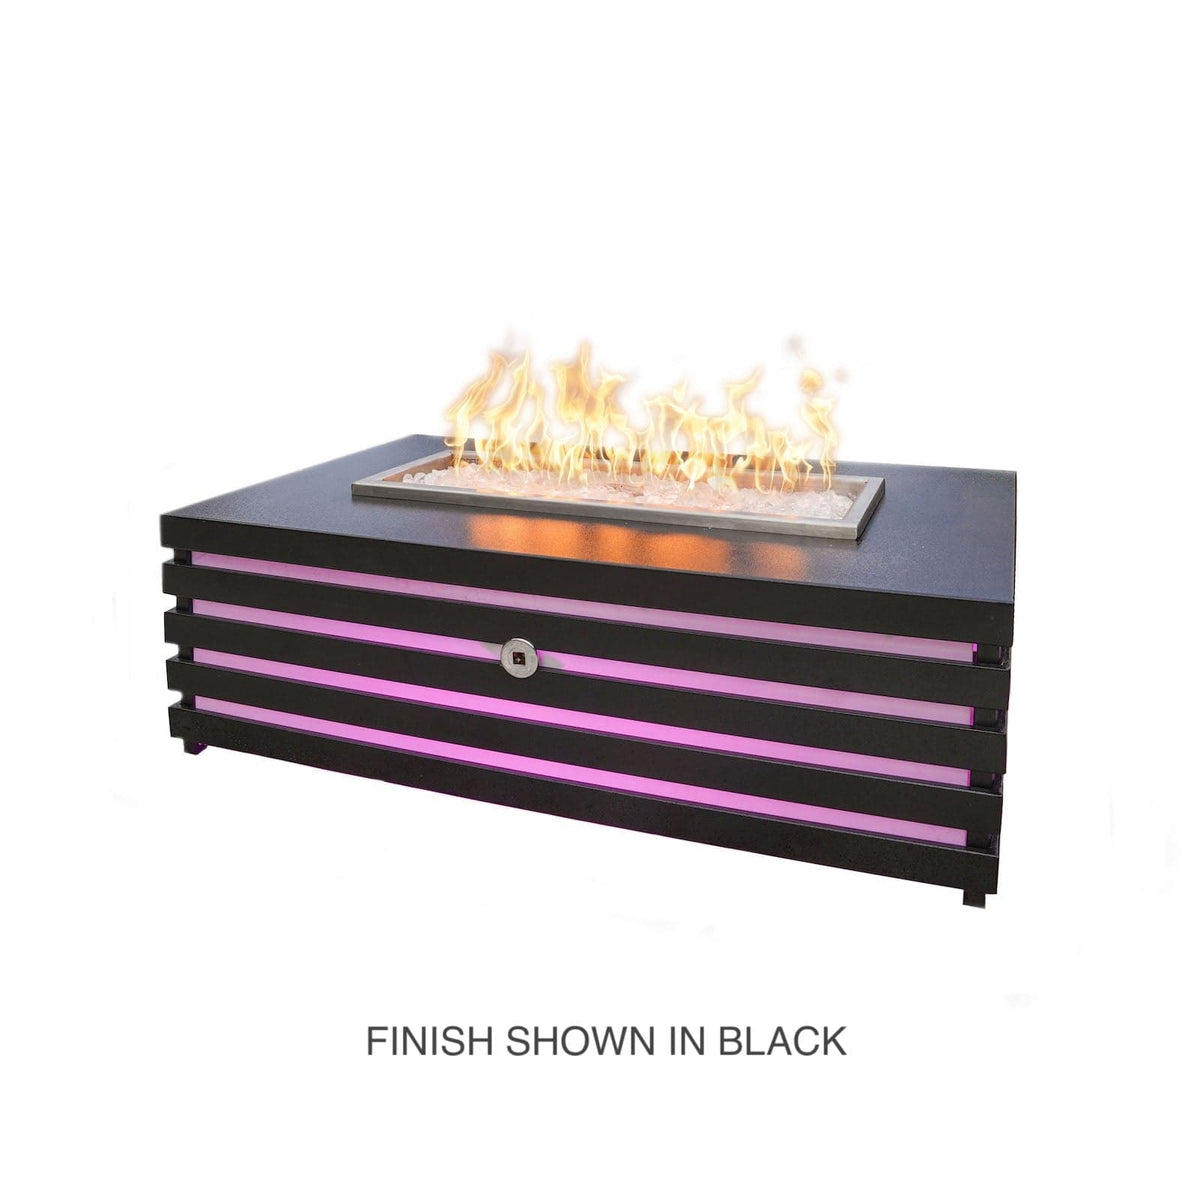 The Outdoor Plus Fire Features The Outdoor Plus 72&quot; Amina Powder Coated Fire Pit / OPT-AMI7224, OPT-AMI7224FSML, OPT-AMI7224FSEN, OPT-AMI7224E12V, OPT-AMI7224EKIT